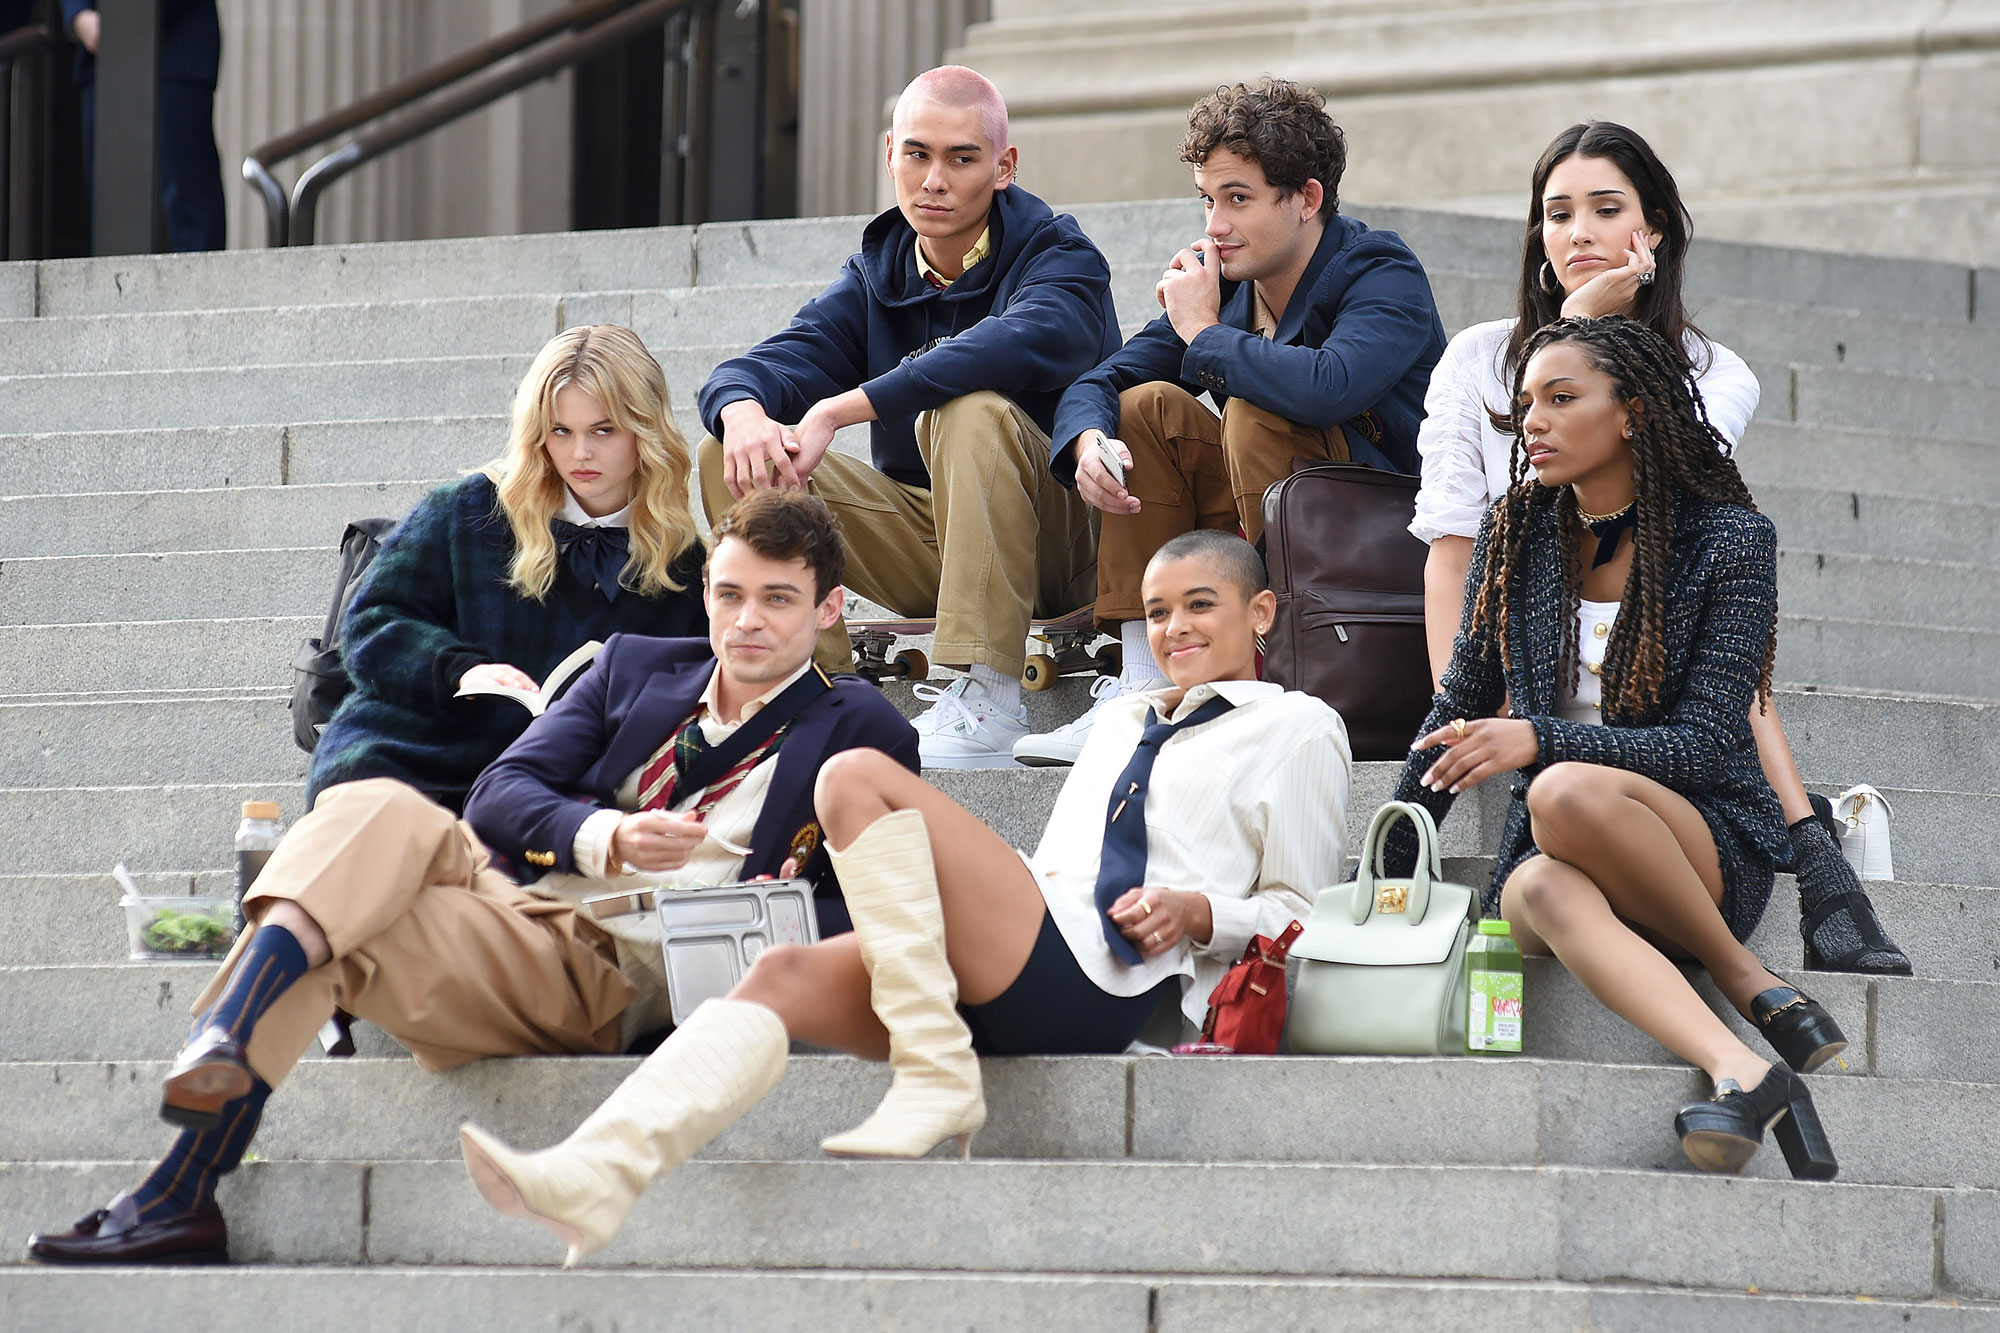 Gossip Girl Reboot: The Male Characters' 10 Best Outfits